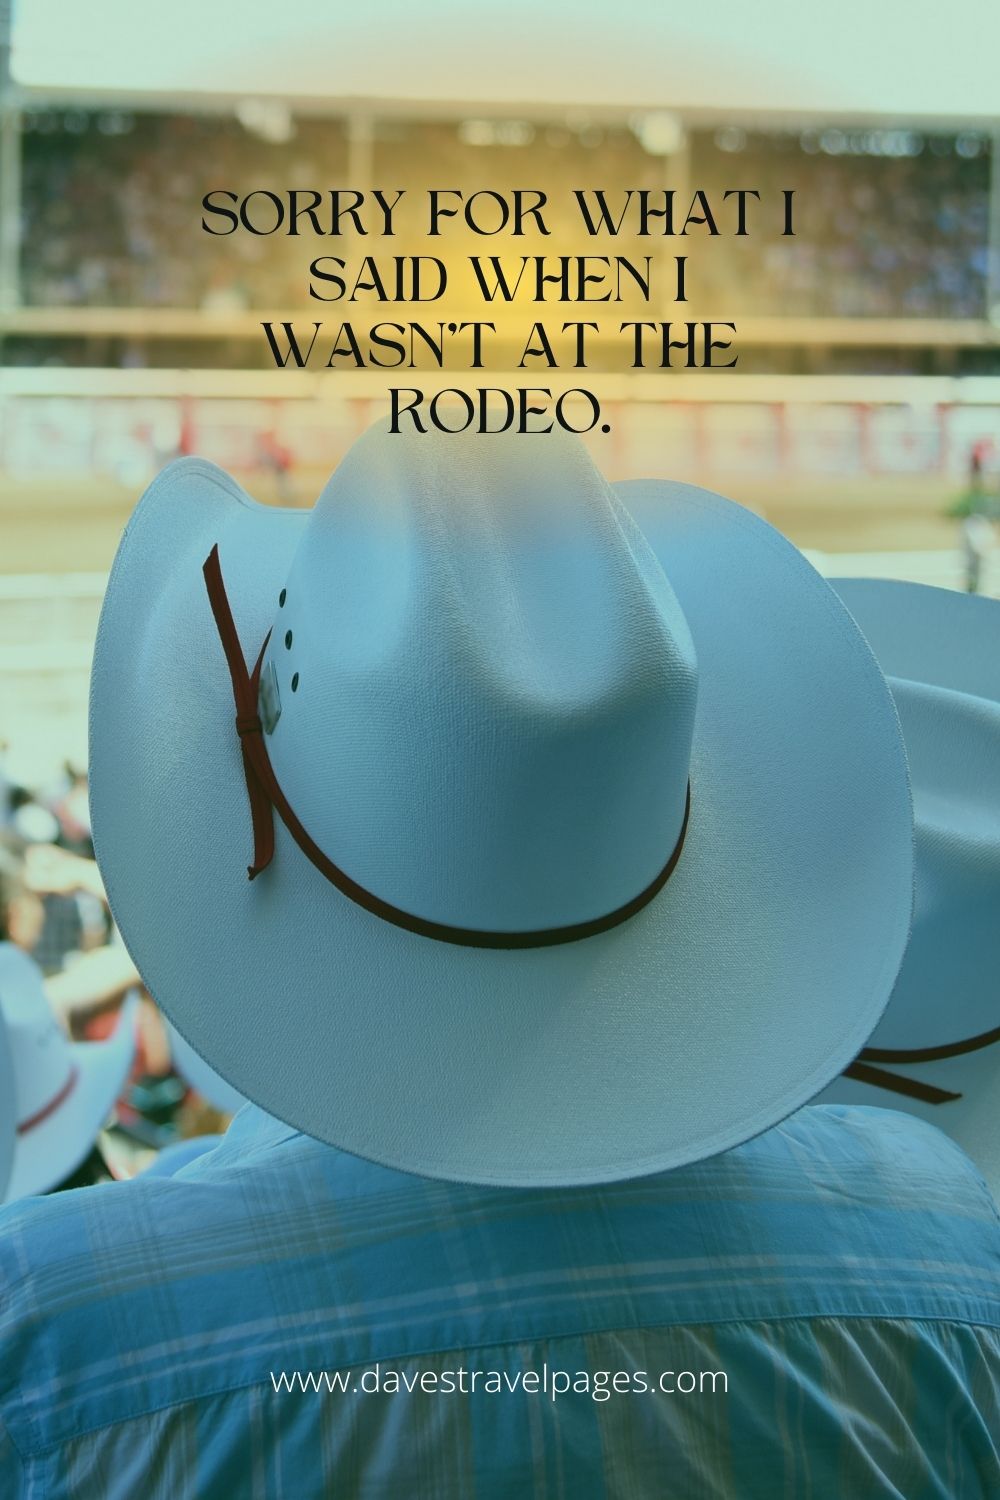 Sorry for what I said when I wasn't at the rodeo